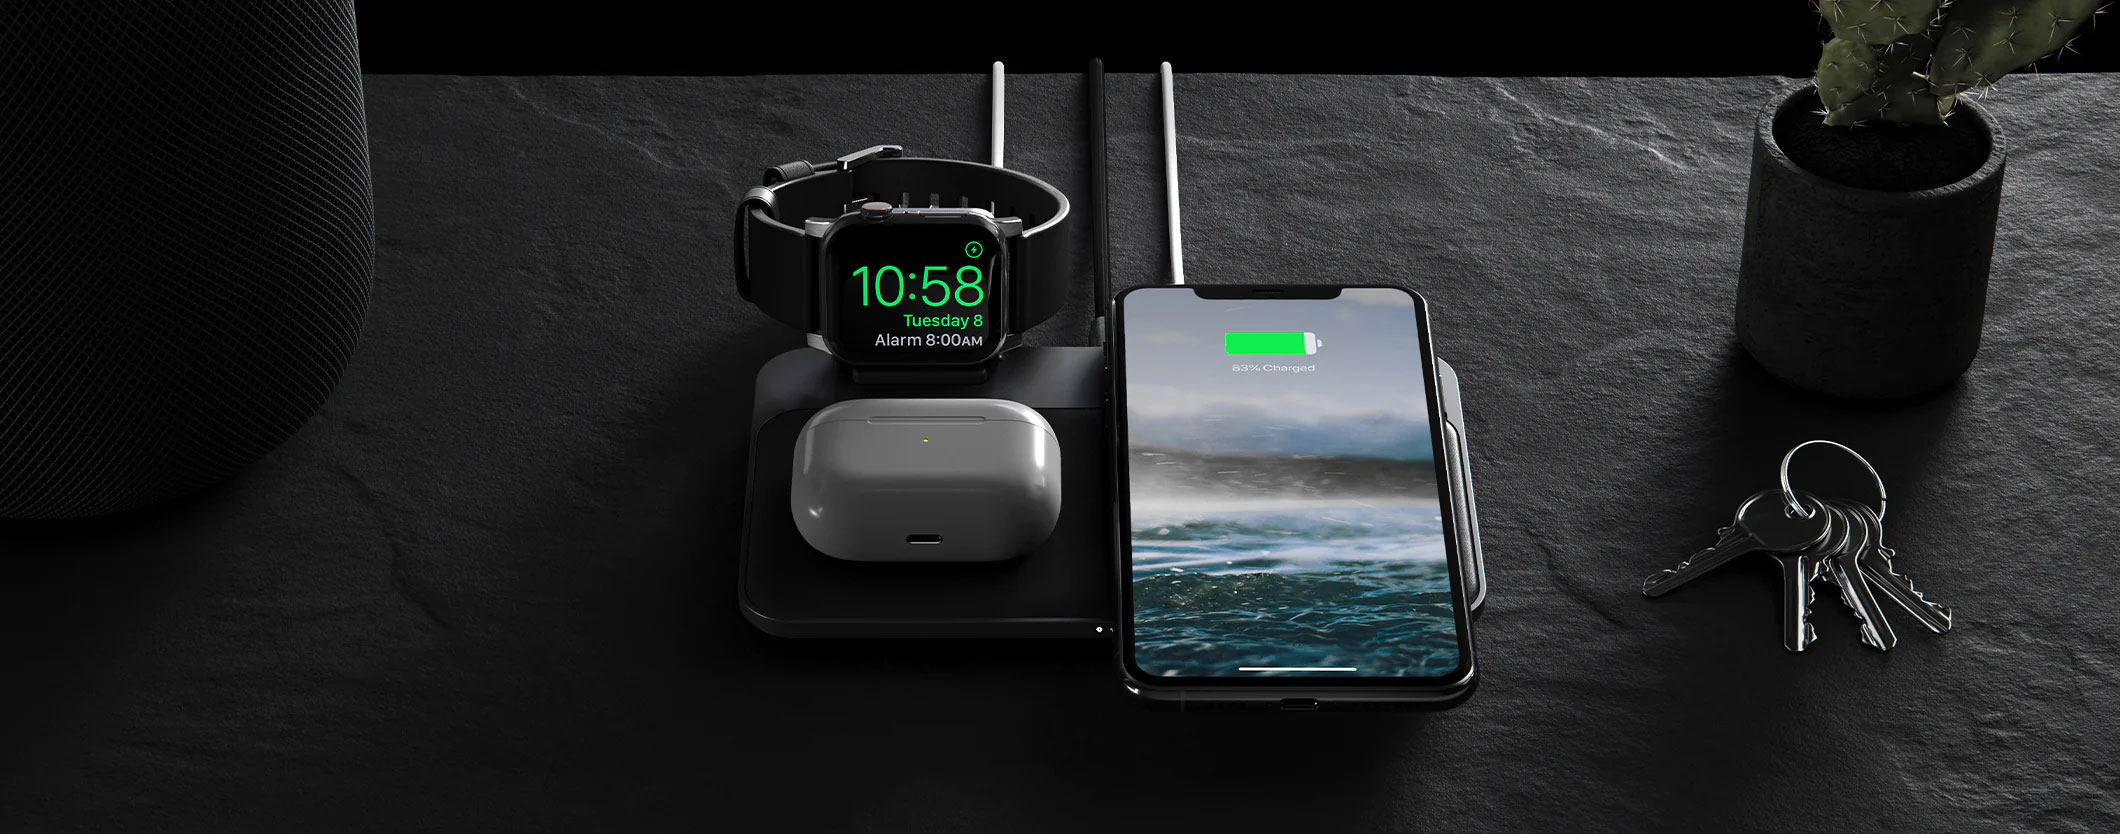 Station Induction NOMAD Base Station Apple Watch Edition